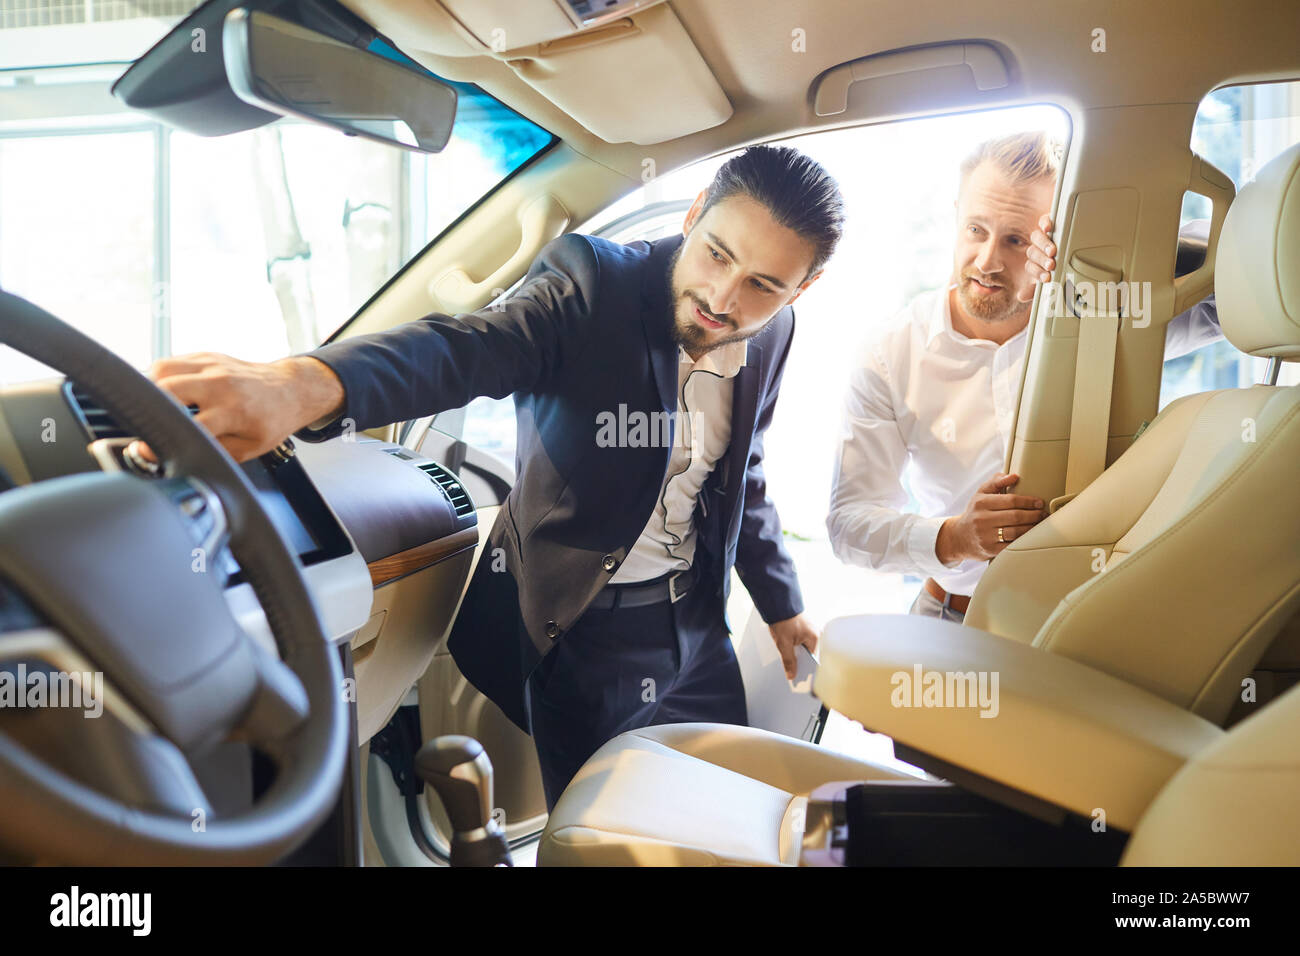 Professional salesmen selling cars at dealership to buyer Stock Photo